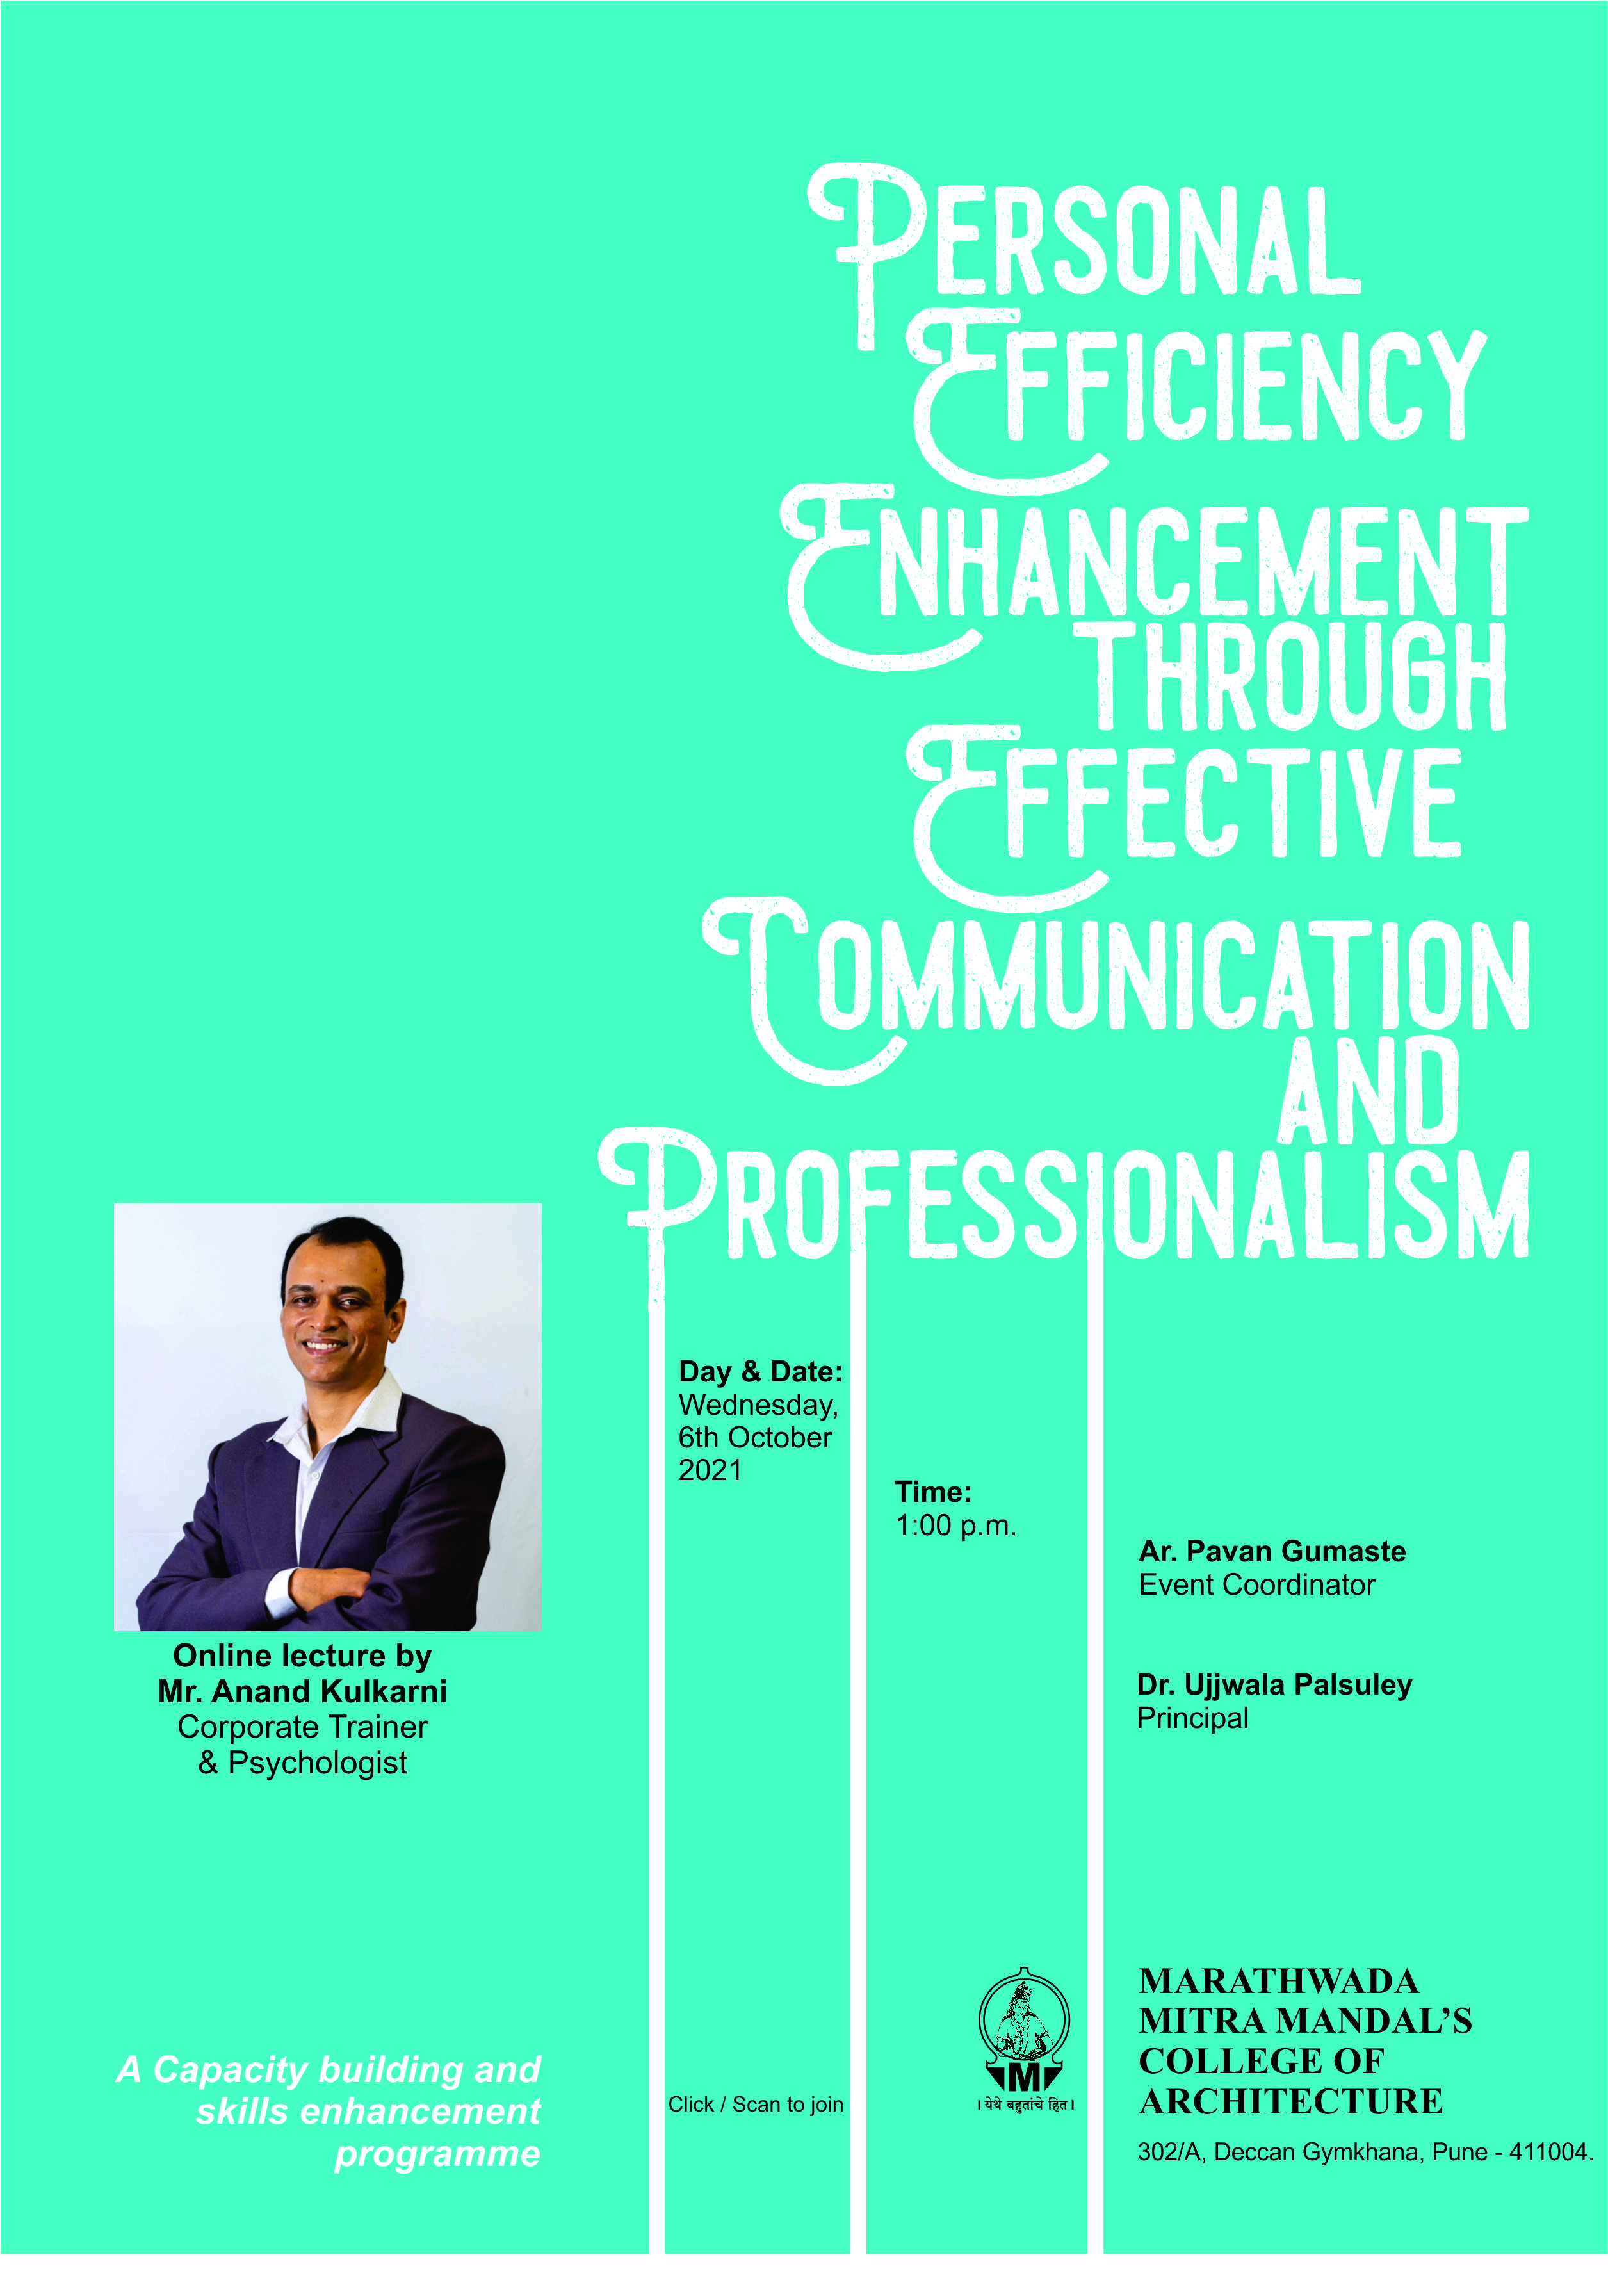 Personal efficiency enhancement through effective communication and professionalism